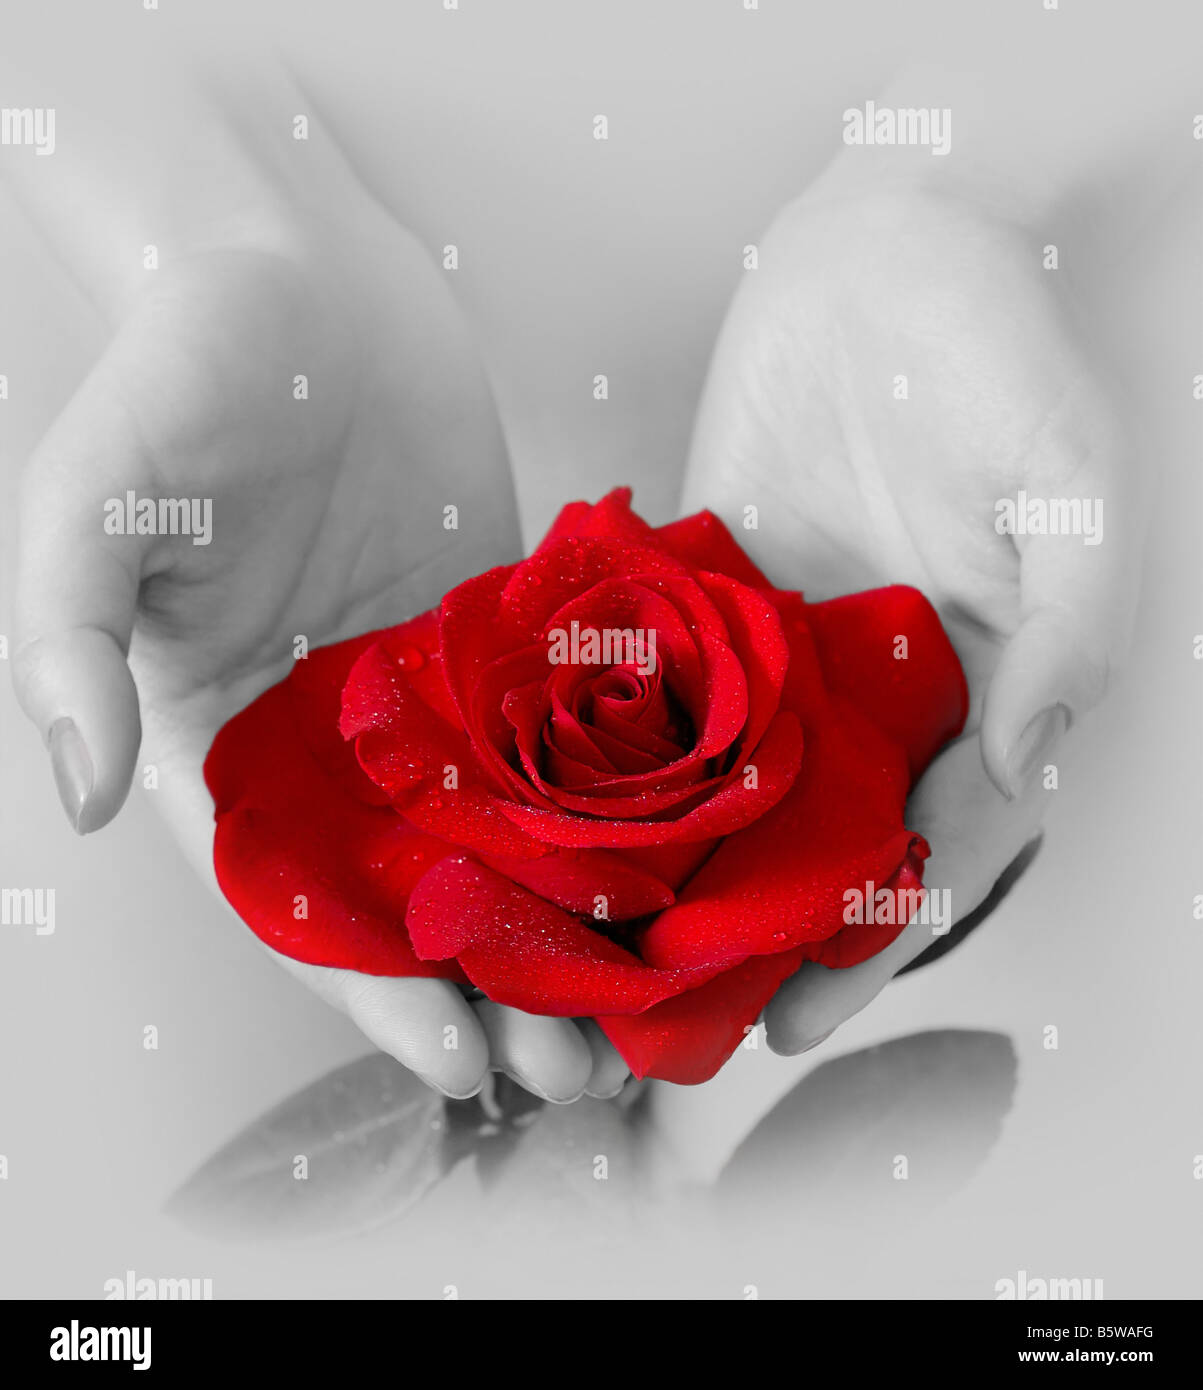 Red rose in woman's hands Stock Photo